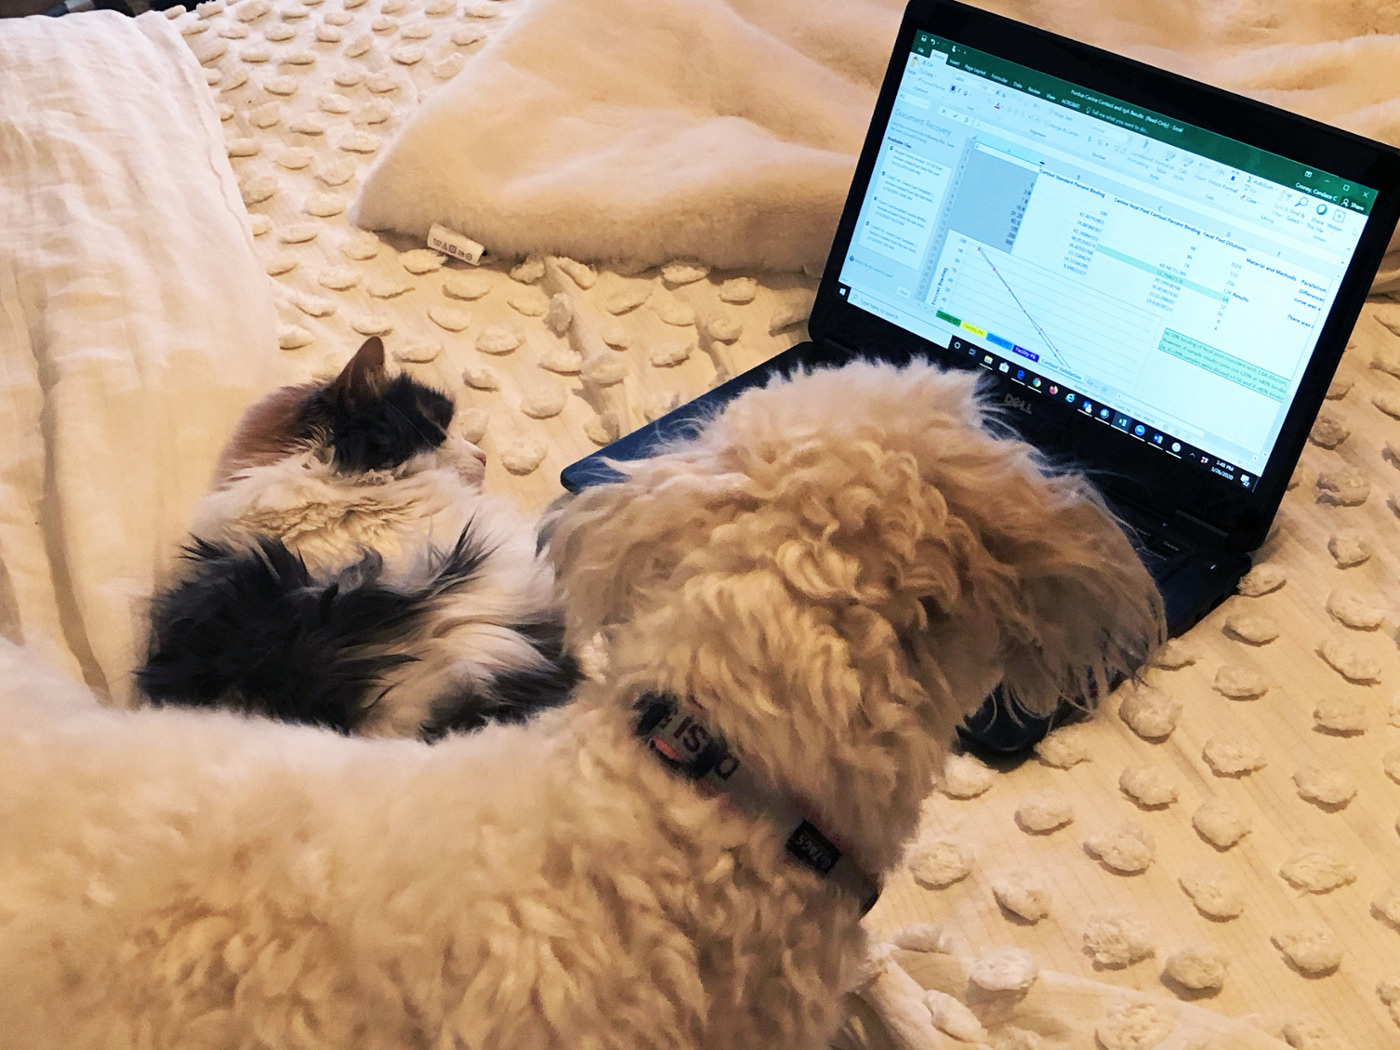 A dog and a cat in front of a laptop computer